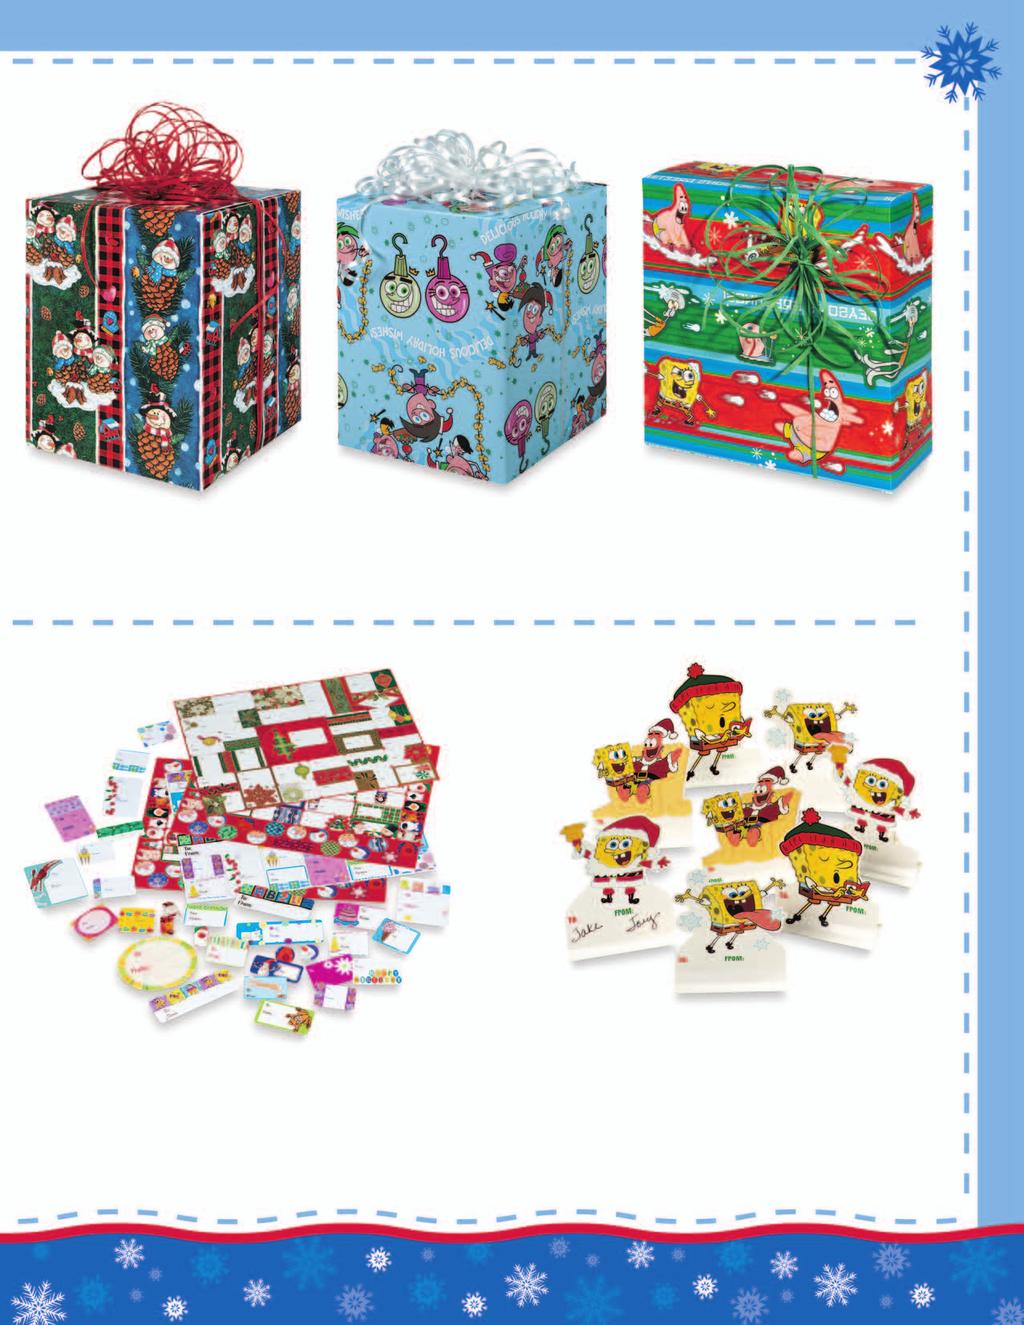 Premium paper to make your gifts look their best!